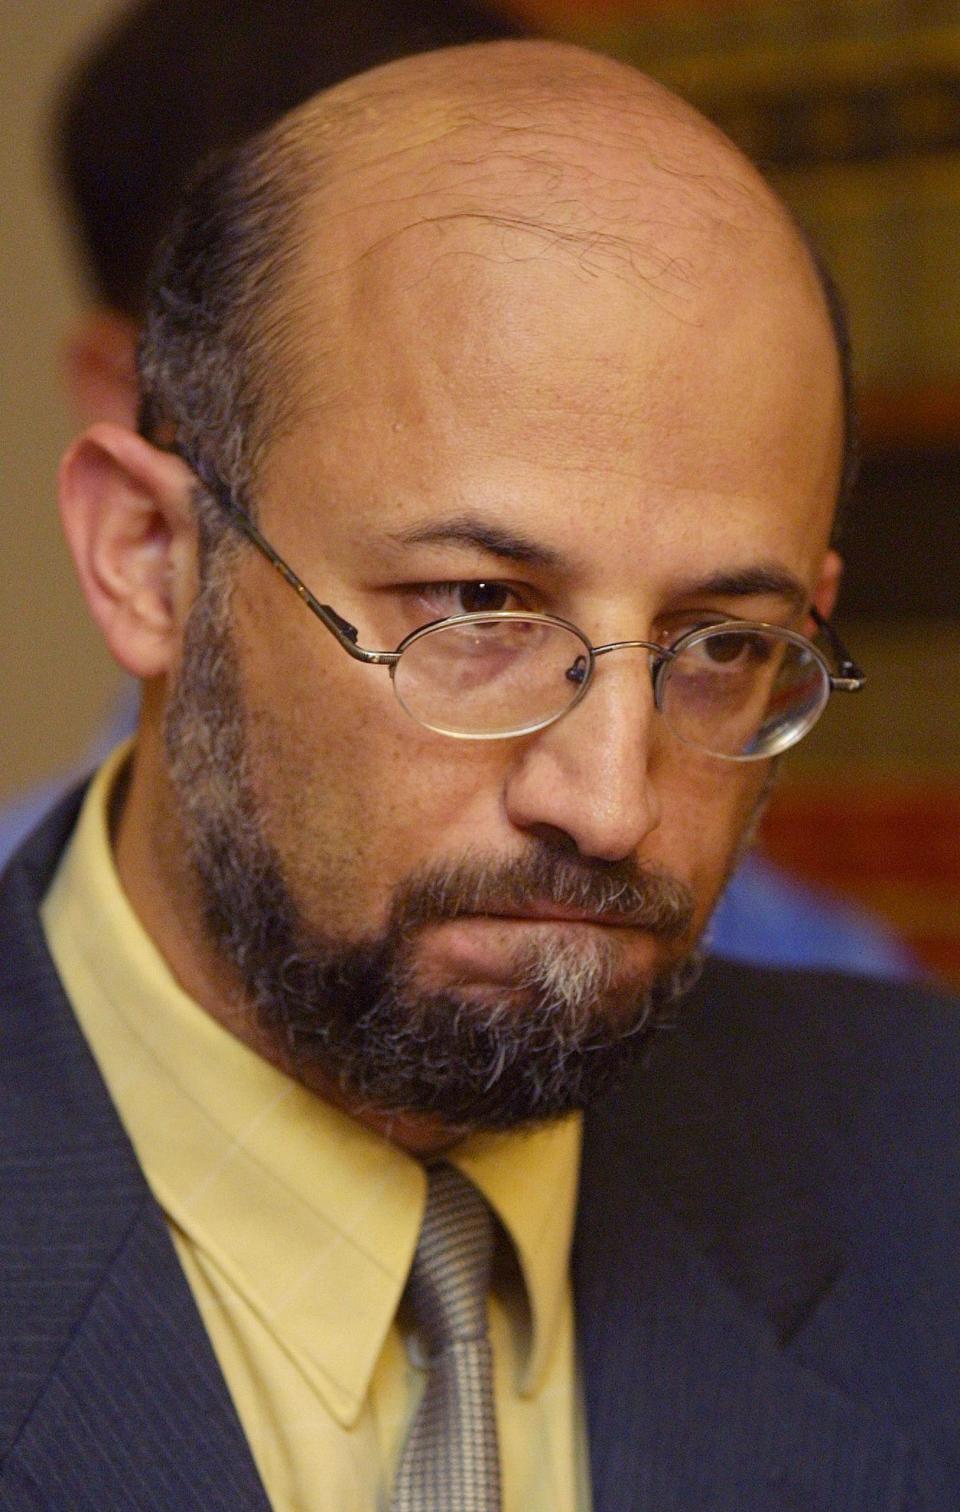 Professor Sami Al-Arian wearing a yellow shirt and dark jacket as he denies Ties To Terrorists at news conference in 2001